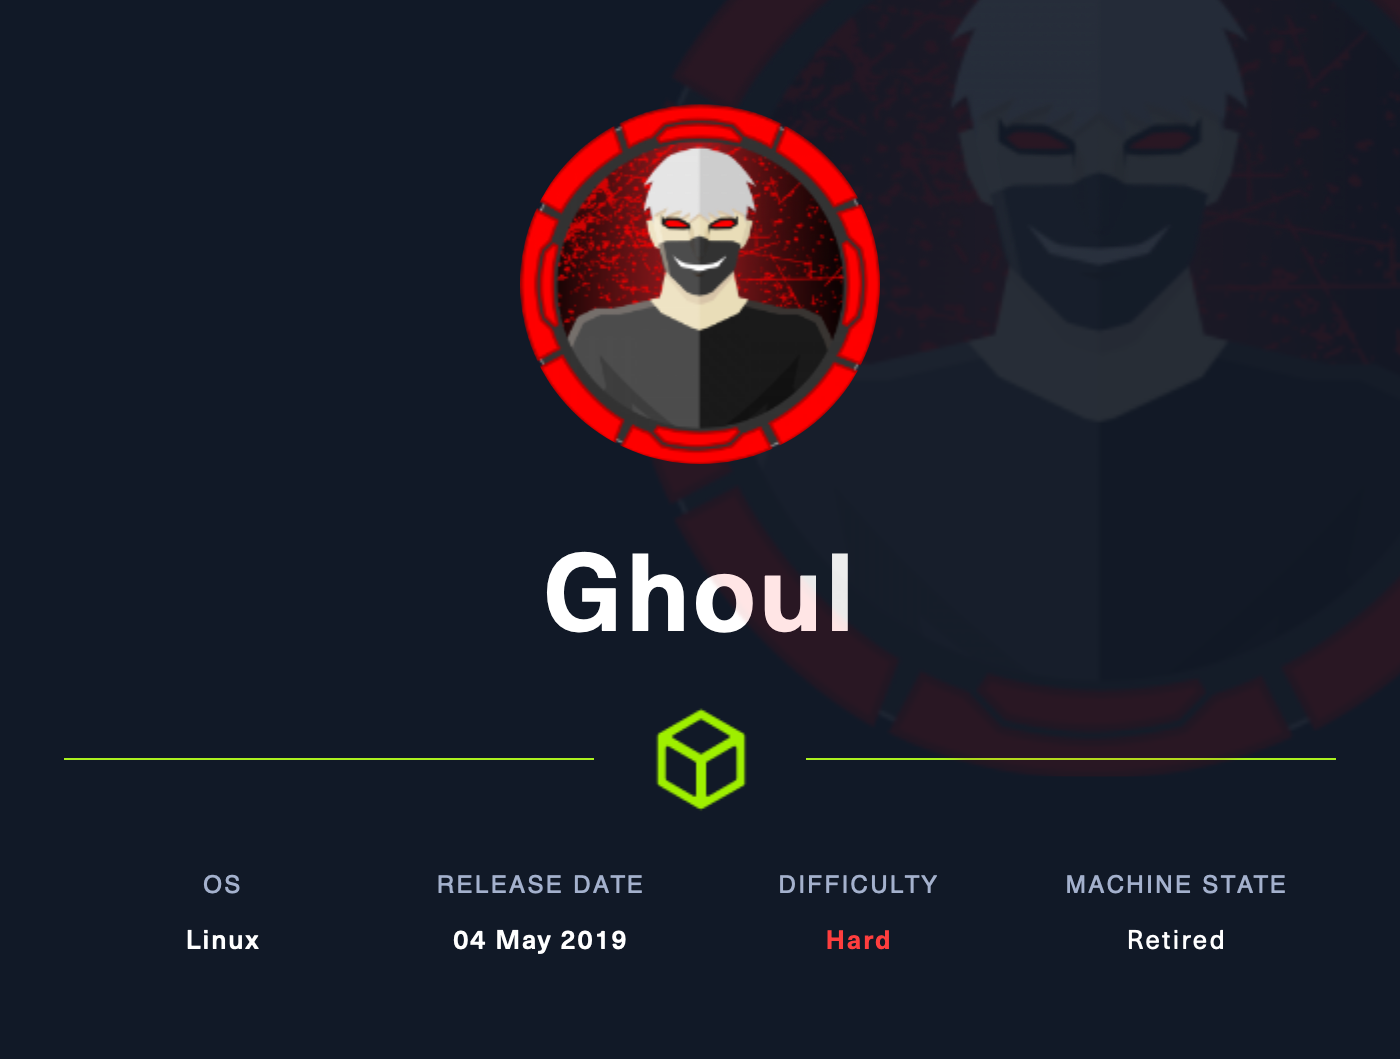 Project Ghoul Codes - Try Hard Guides